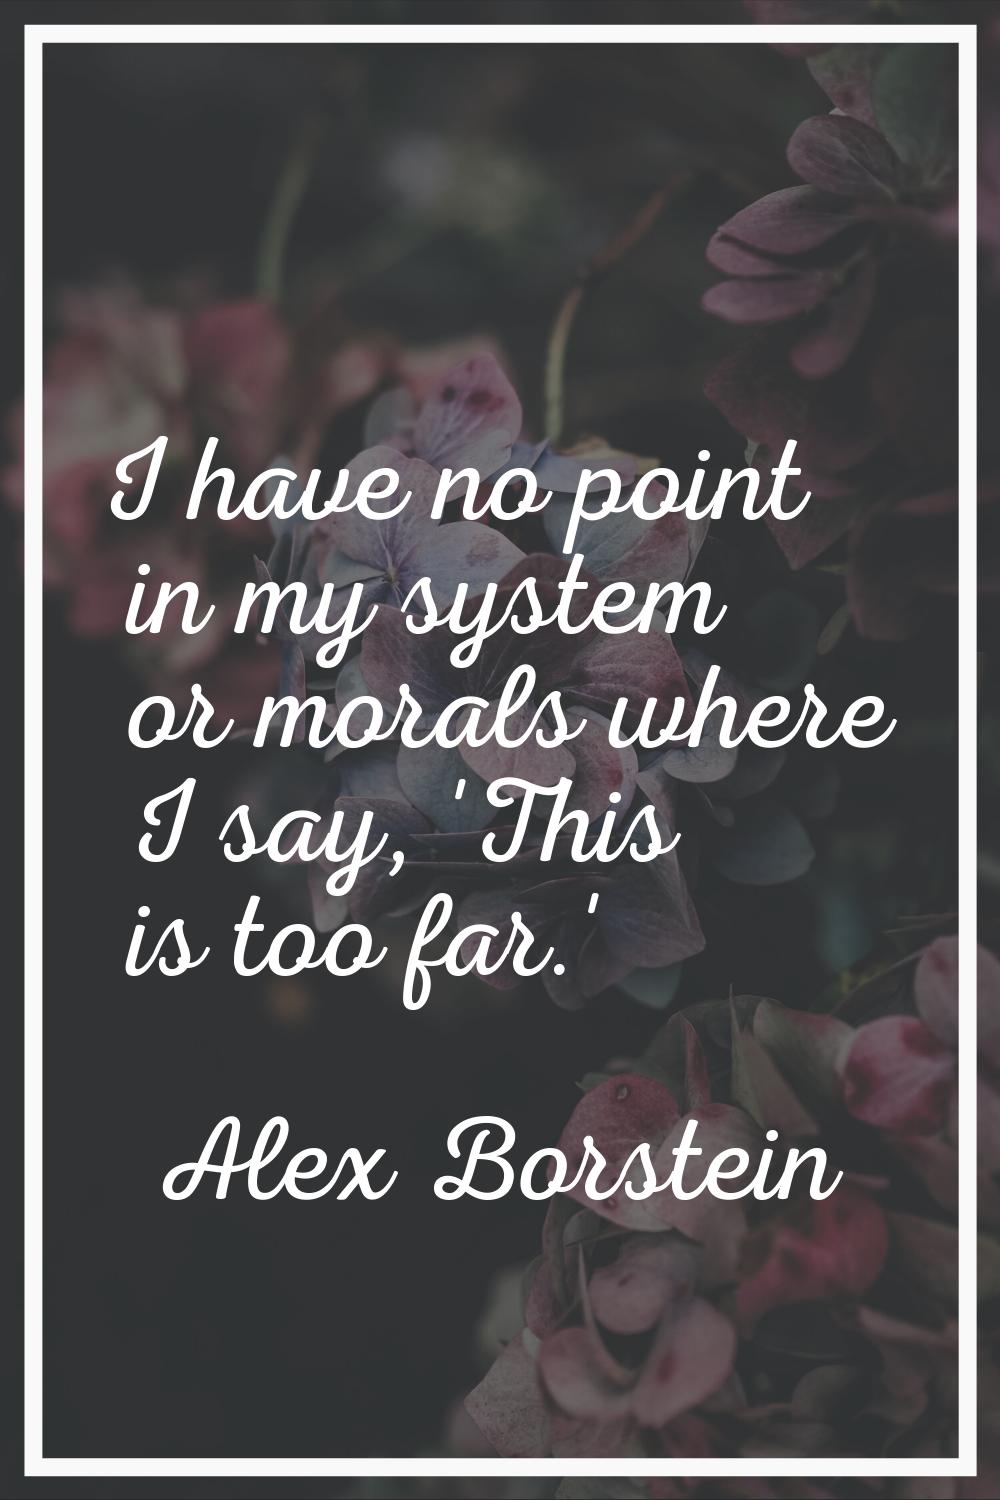 I have no point in my system or morals where I say, 'This is too far.'